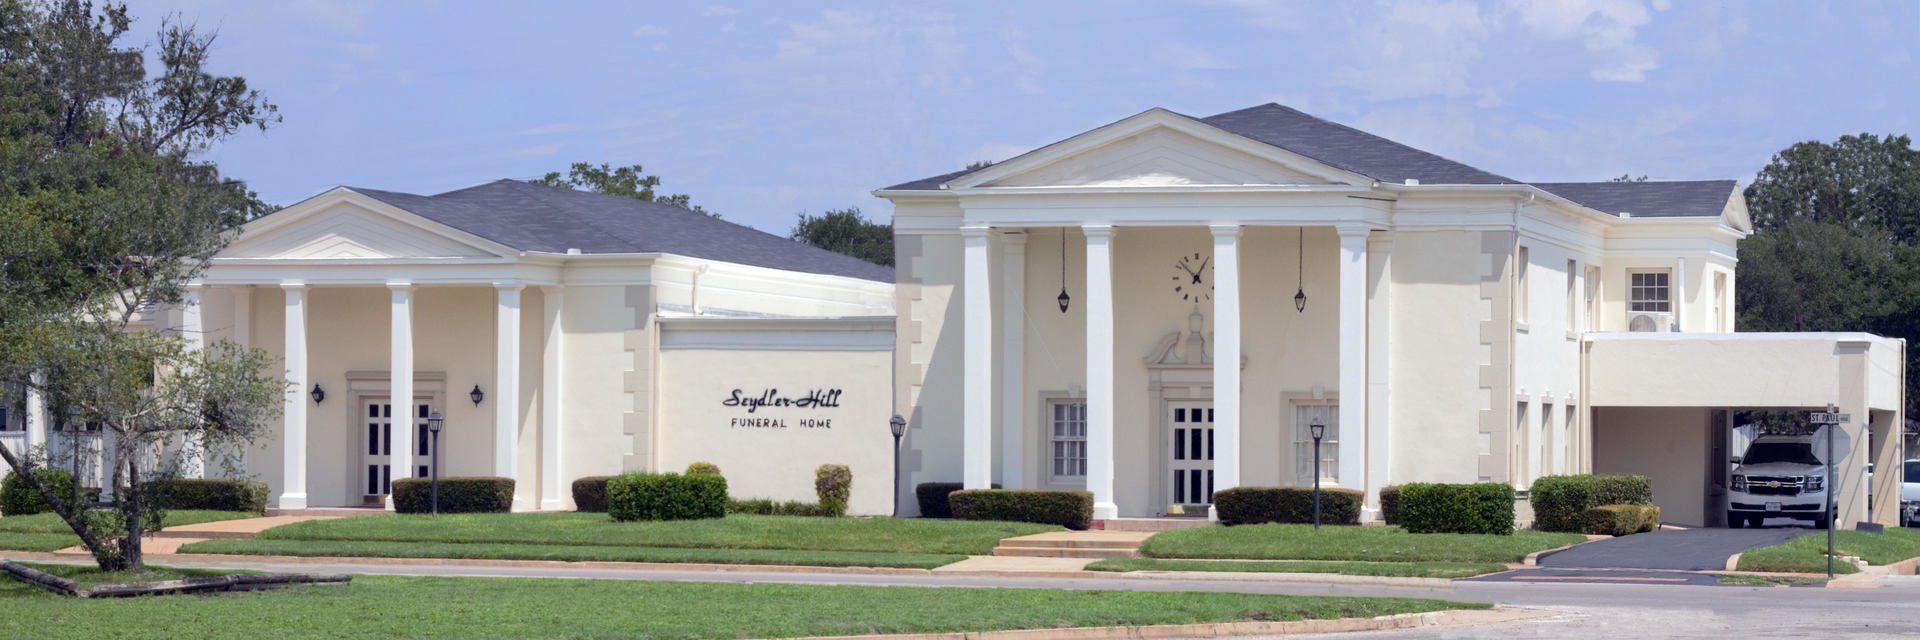 Seydler Hill Funeral Home in Gonzales Texas